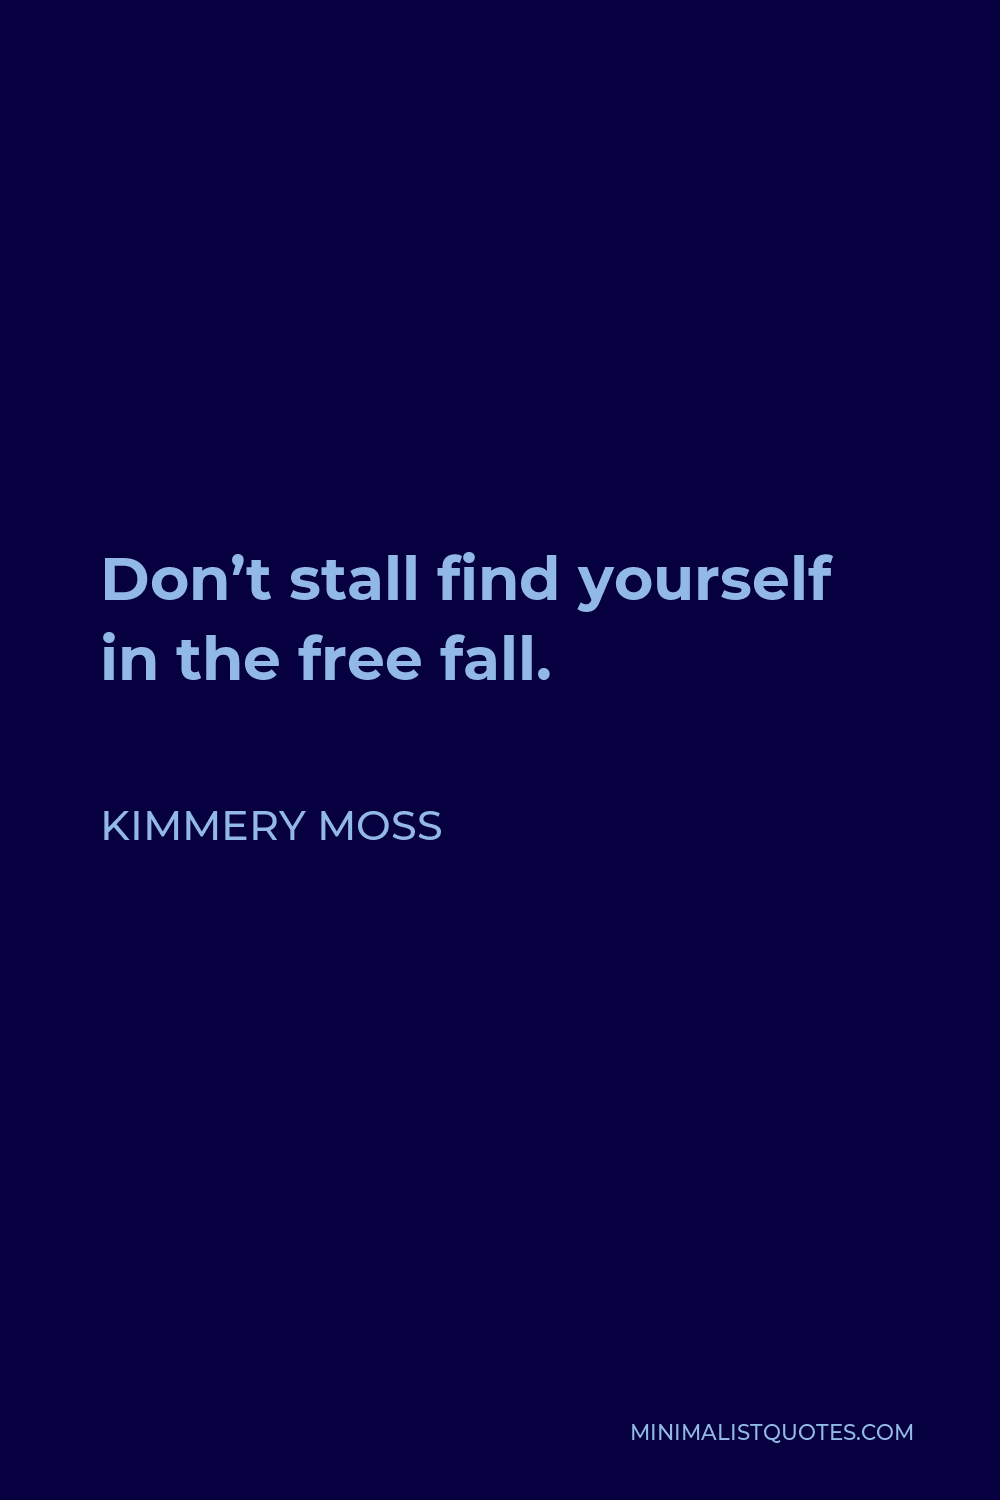 Kimmery Moss Quote - Don’t stall find yourself in the free fall.